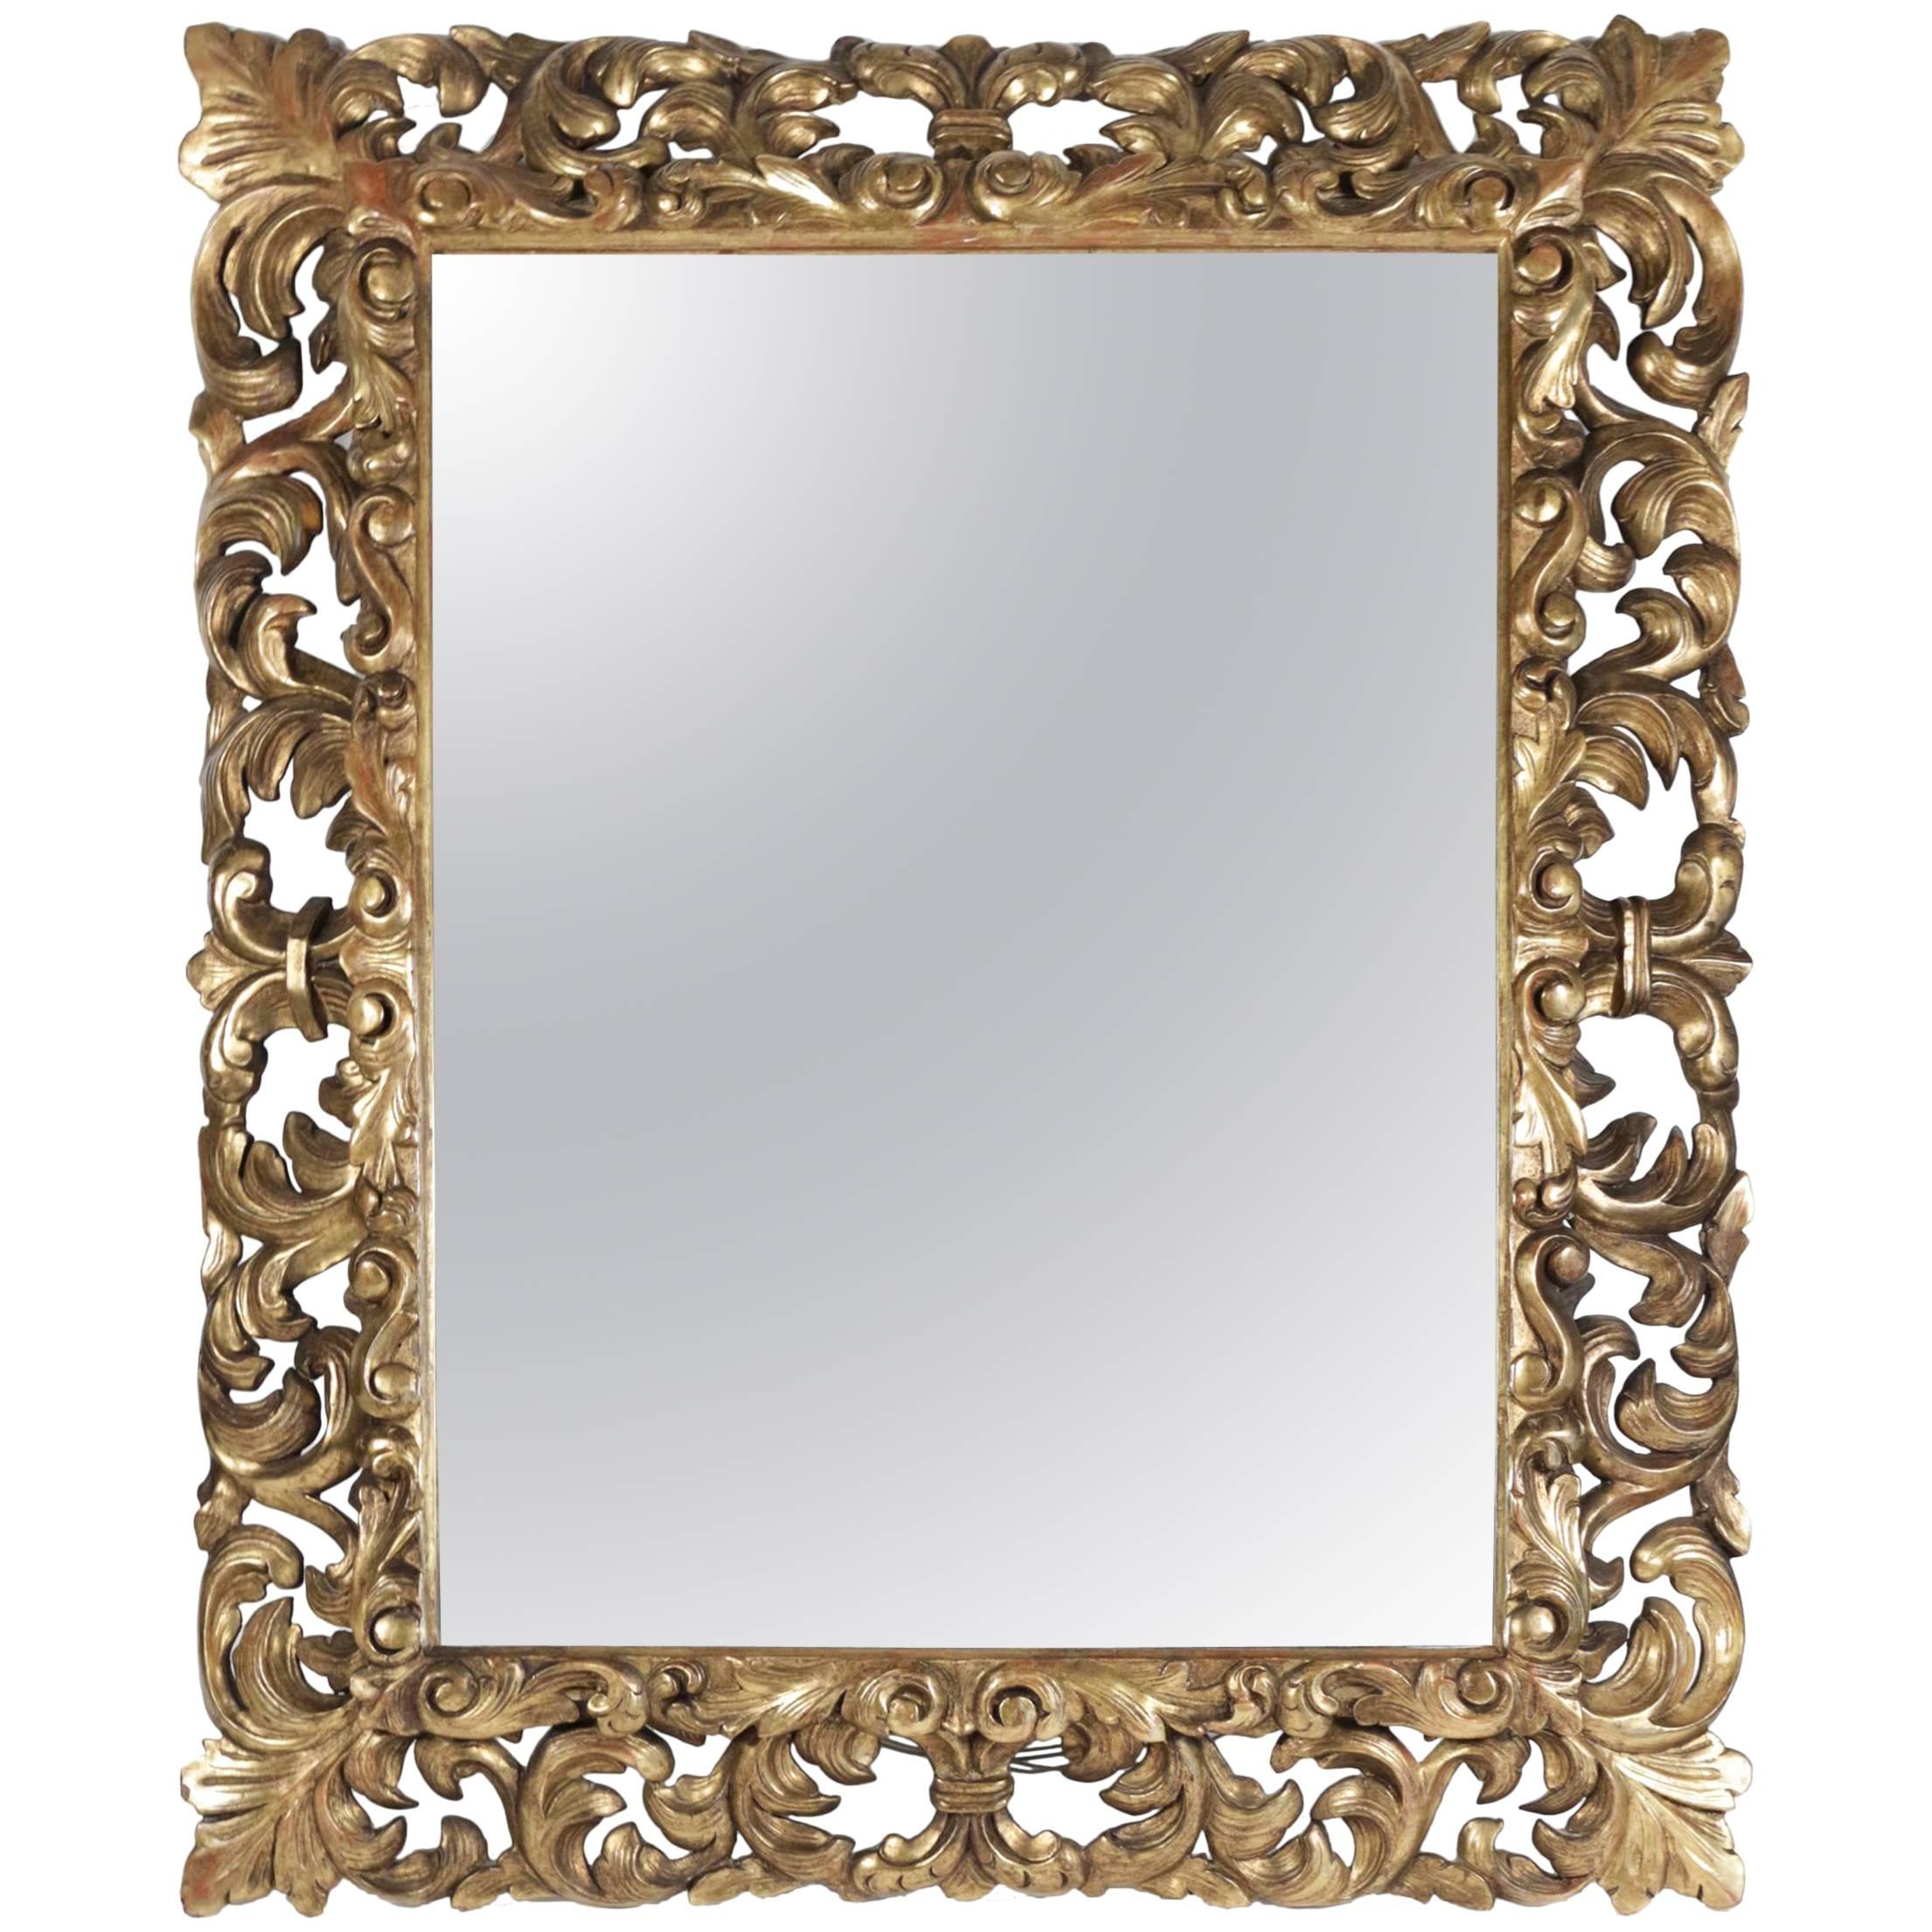 Napoleon III Mirror in Hand-Carved Gold Gilded Wood with Beveled Mirror